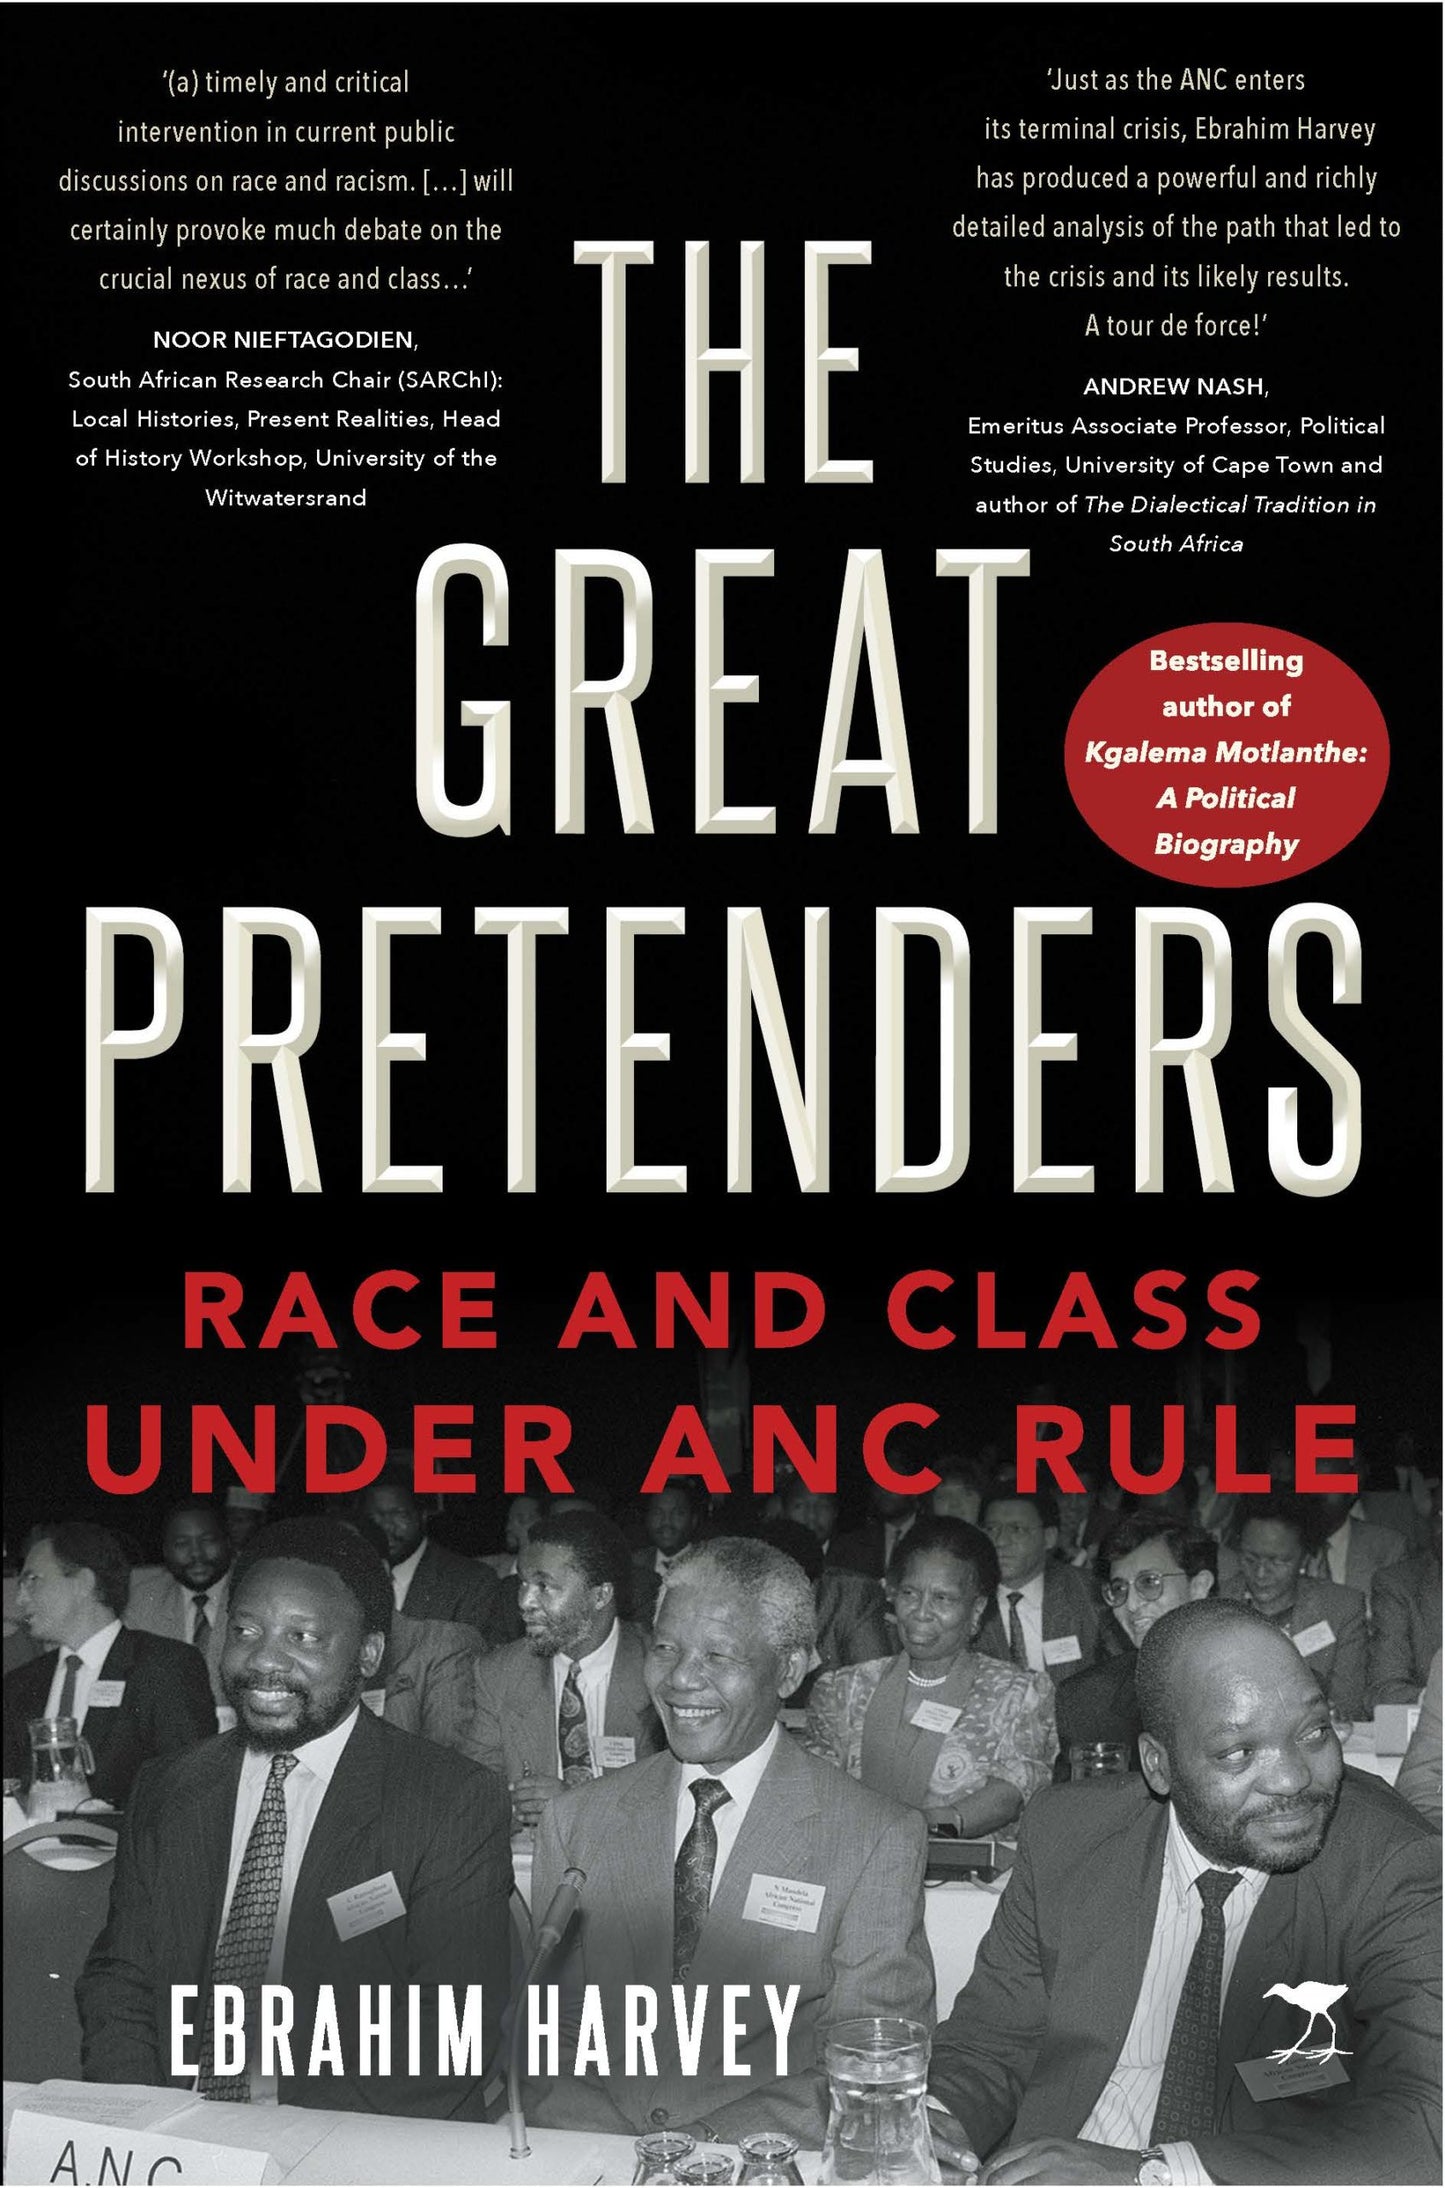 Great Pretenders, The: Race and Class under ANC Rule